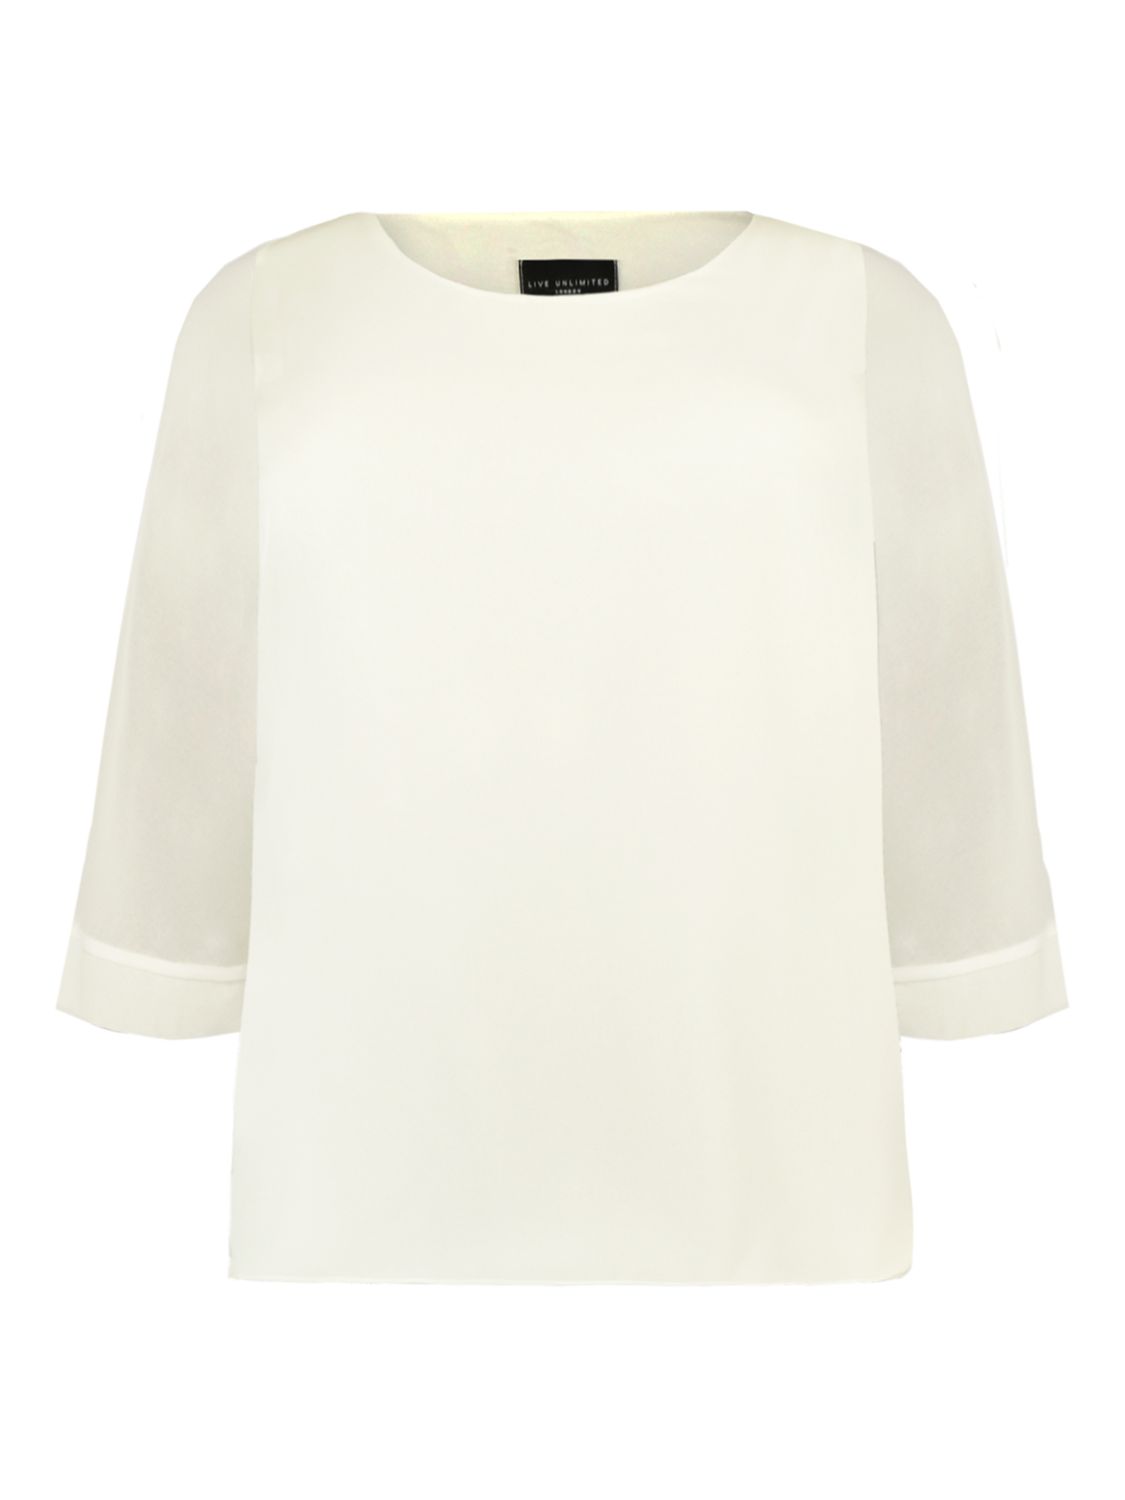 Live Unlimited Chiffon Overlay Top, Cream at John Lewis & Partners